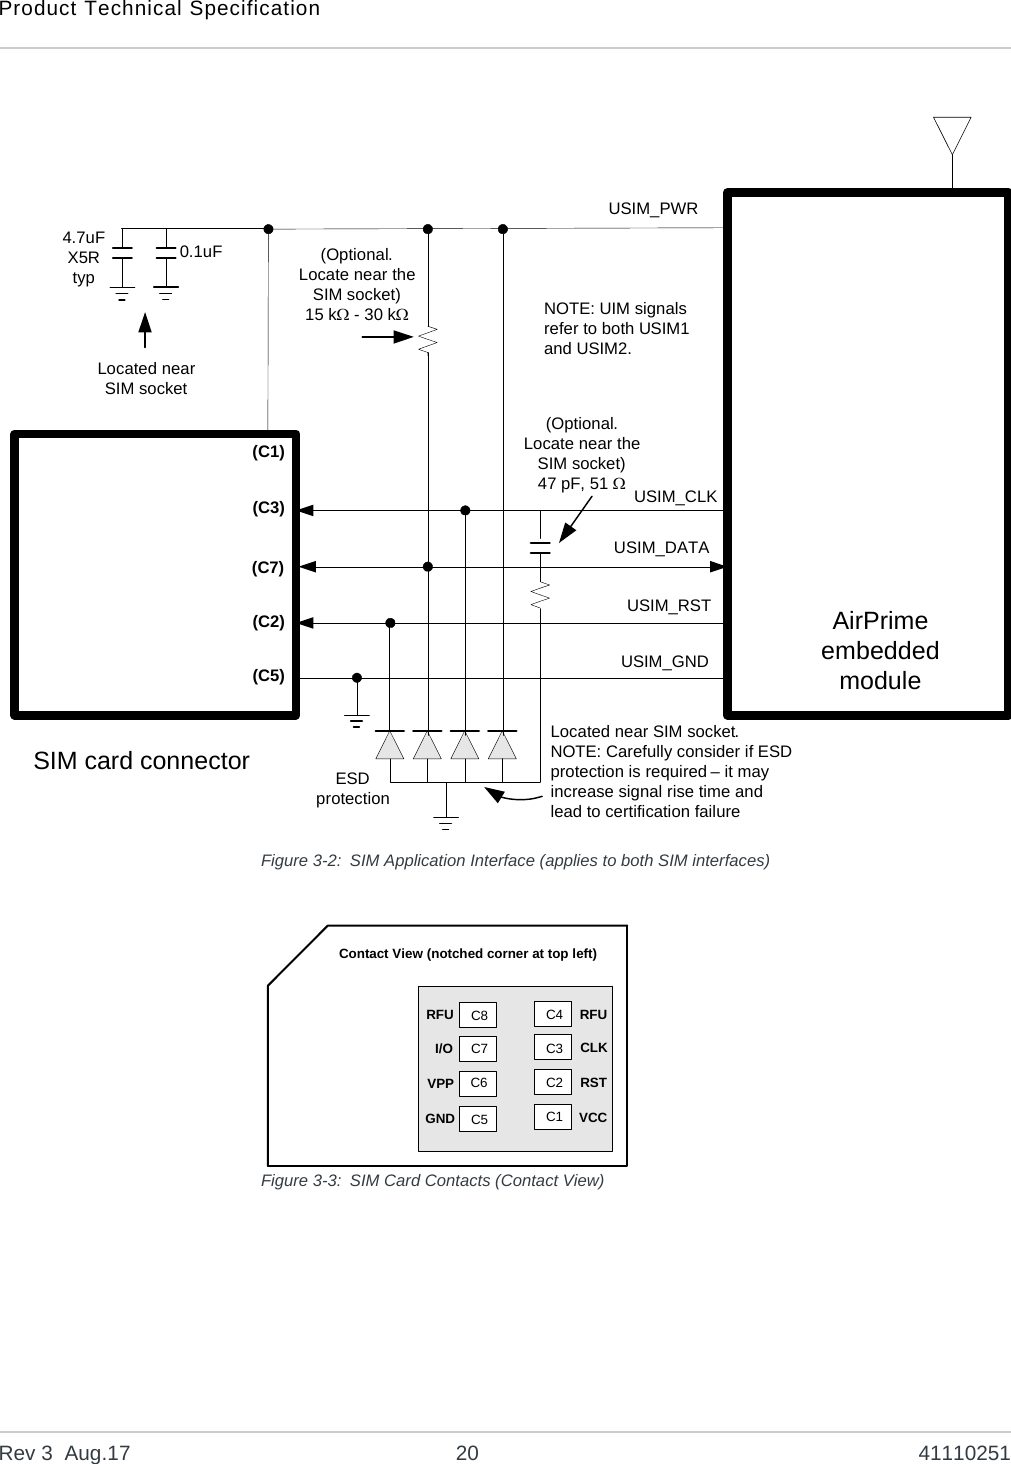 Product Technical SpecificationRev 3  Aug.17 20 41110251Figure 3-2: SIM Application Interface (applies to both SIM interfaces)Figure 3-3: SIM Card Contacts (Contact View)AirPrime embedded moduleSIM card connector(Optional. Locate near the SIM socket)47 pF, 51 4.7uFX5Rtyp(C1)USIM_PWRUSIM_CLKUSIM_DATAUSIM_RSTLocated near SIM socketLocated near SIM socket.NOTE: Carefully consider if ESD protection is required – it may increase signal rise time and lead to certification failureUSIM_GNDESD protection(C3)(C7)(C2)(C5)(Optional. Locate near the SIM socket)15 k - 30 k0.1uFNOTE: UIM signals refer to both USIM1 and USIM2.C8C7C6C5C4C3C2C1GND VCCVPP RSTI/O CLKRFU RFUContact View (notched corner at top left)